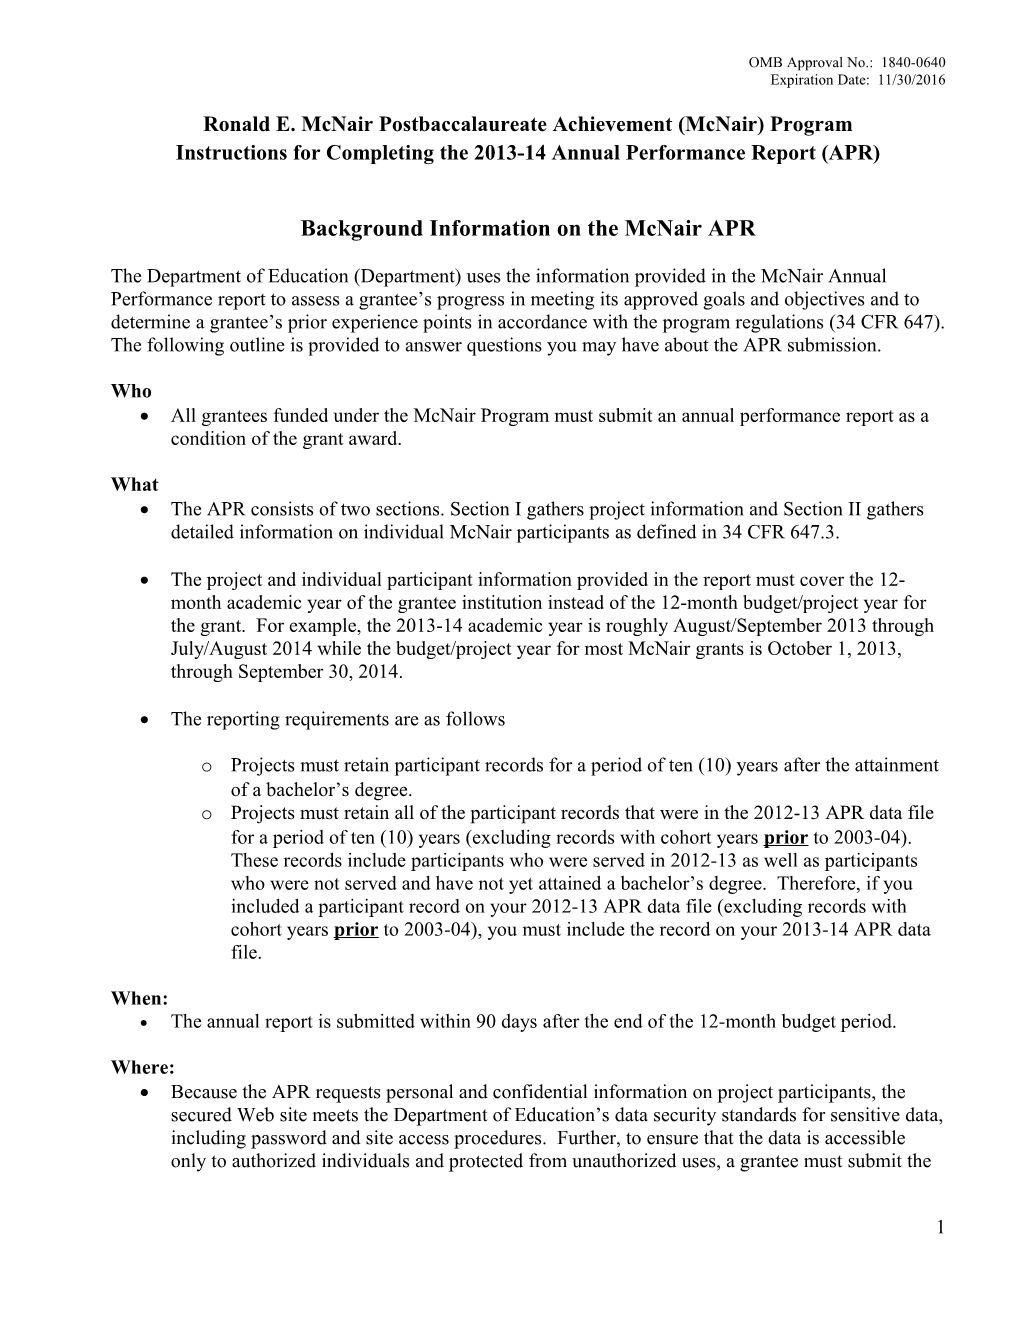 2013-2014 Annual Performance Report Instructions for the Ronald Mcnair Program (MS Word)